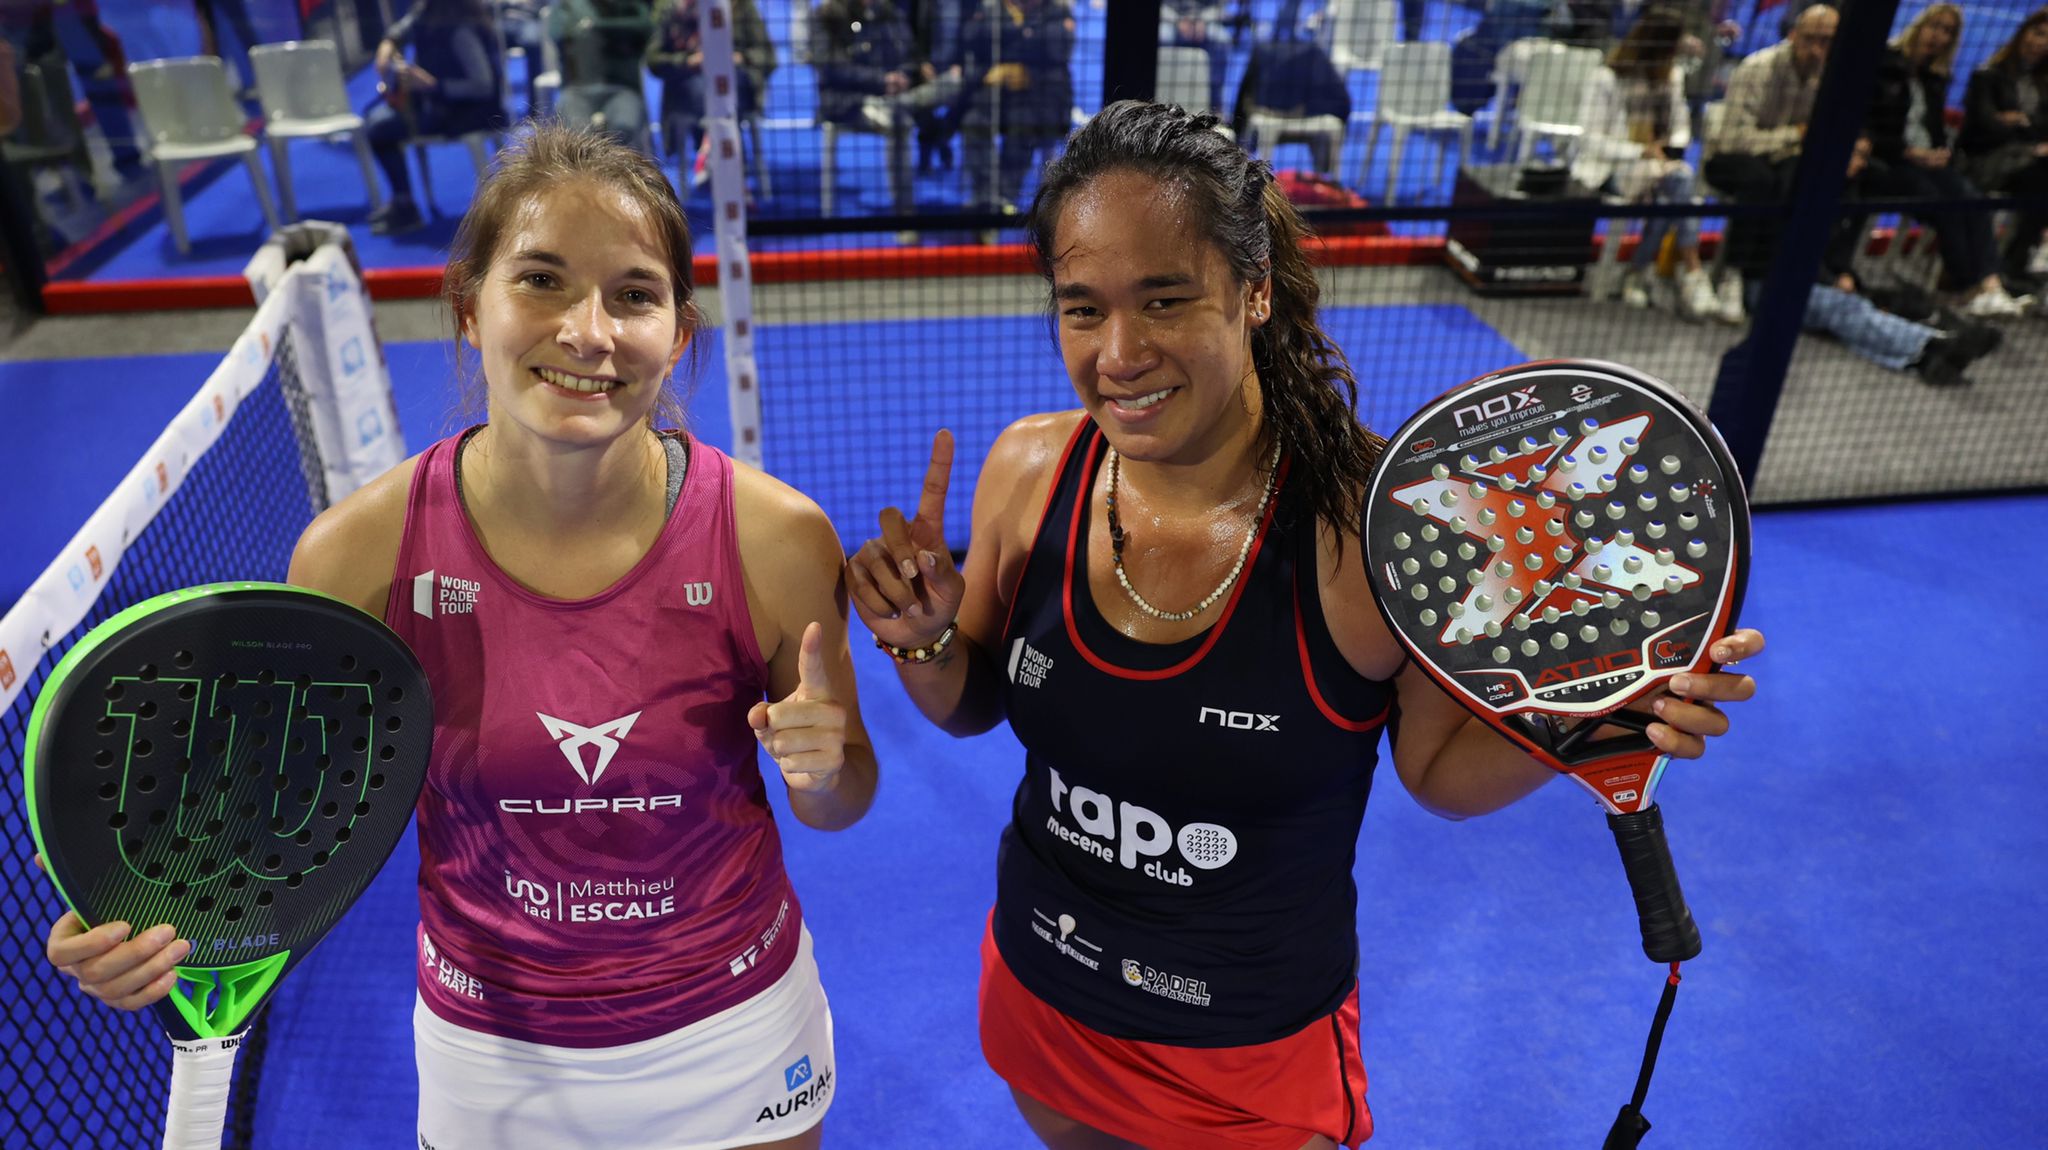 P2000 PH: the title for Alix Collombon and Léa Godallier!